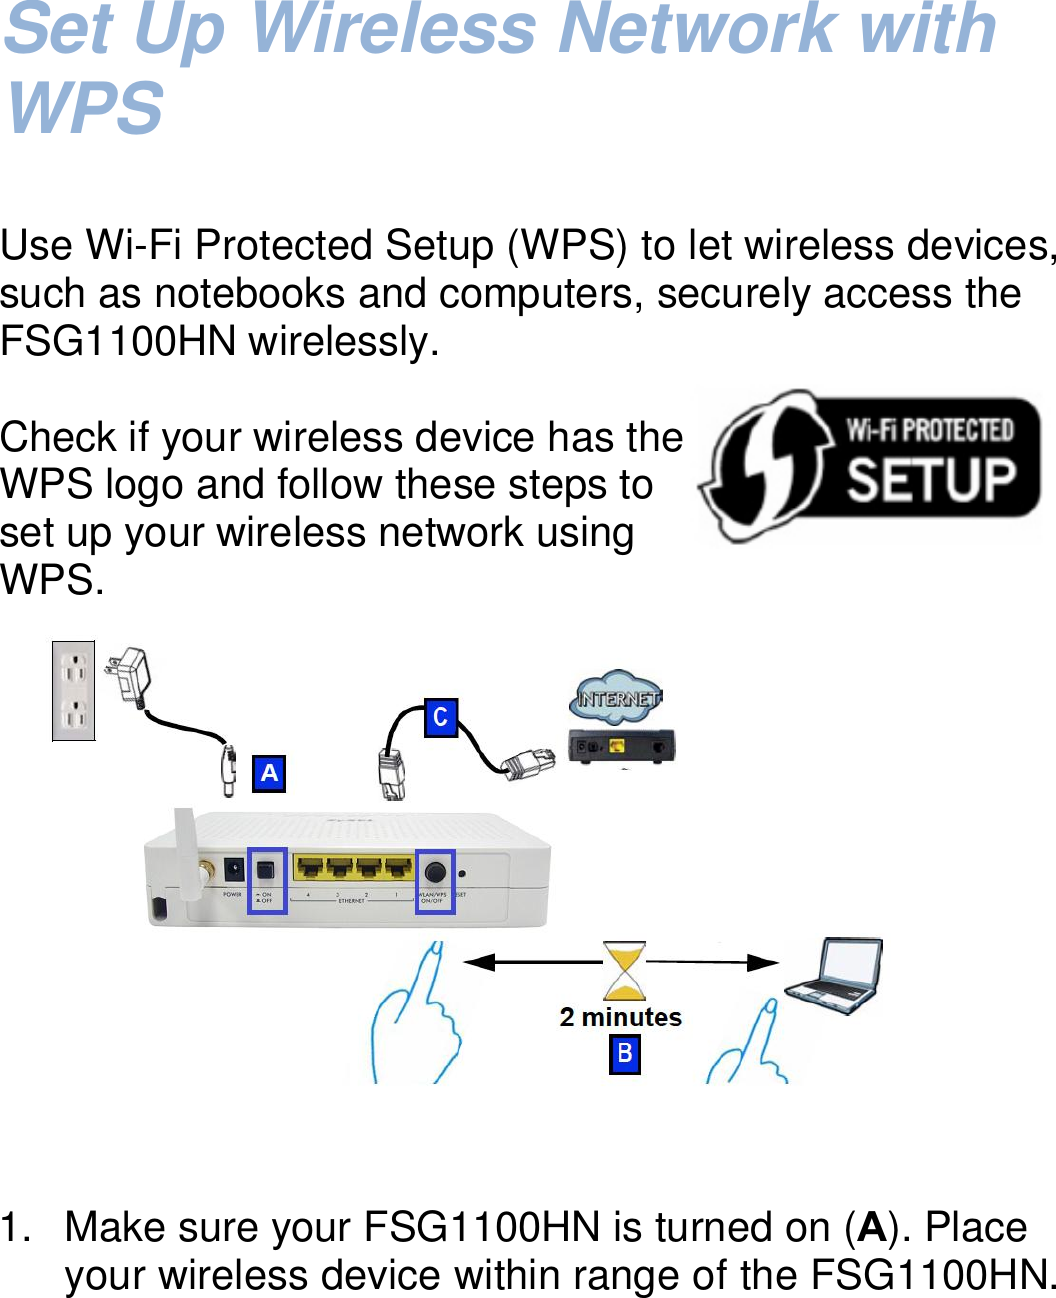   Set Up Wireless Network with WPS    Use Wi-Fi Protected Setup (WPS) to let wireless devices, such as notebooks and computers, securely access the FSG1100HN wirelessly.  Check if your wireless device has the WPS logo and follow these steps to set up your wireless network using     WPS.       1.  Make sure your FSG1100HN is turned on (A). Place your wireless device within range of the FSG1100HN.  